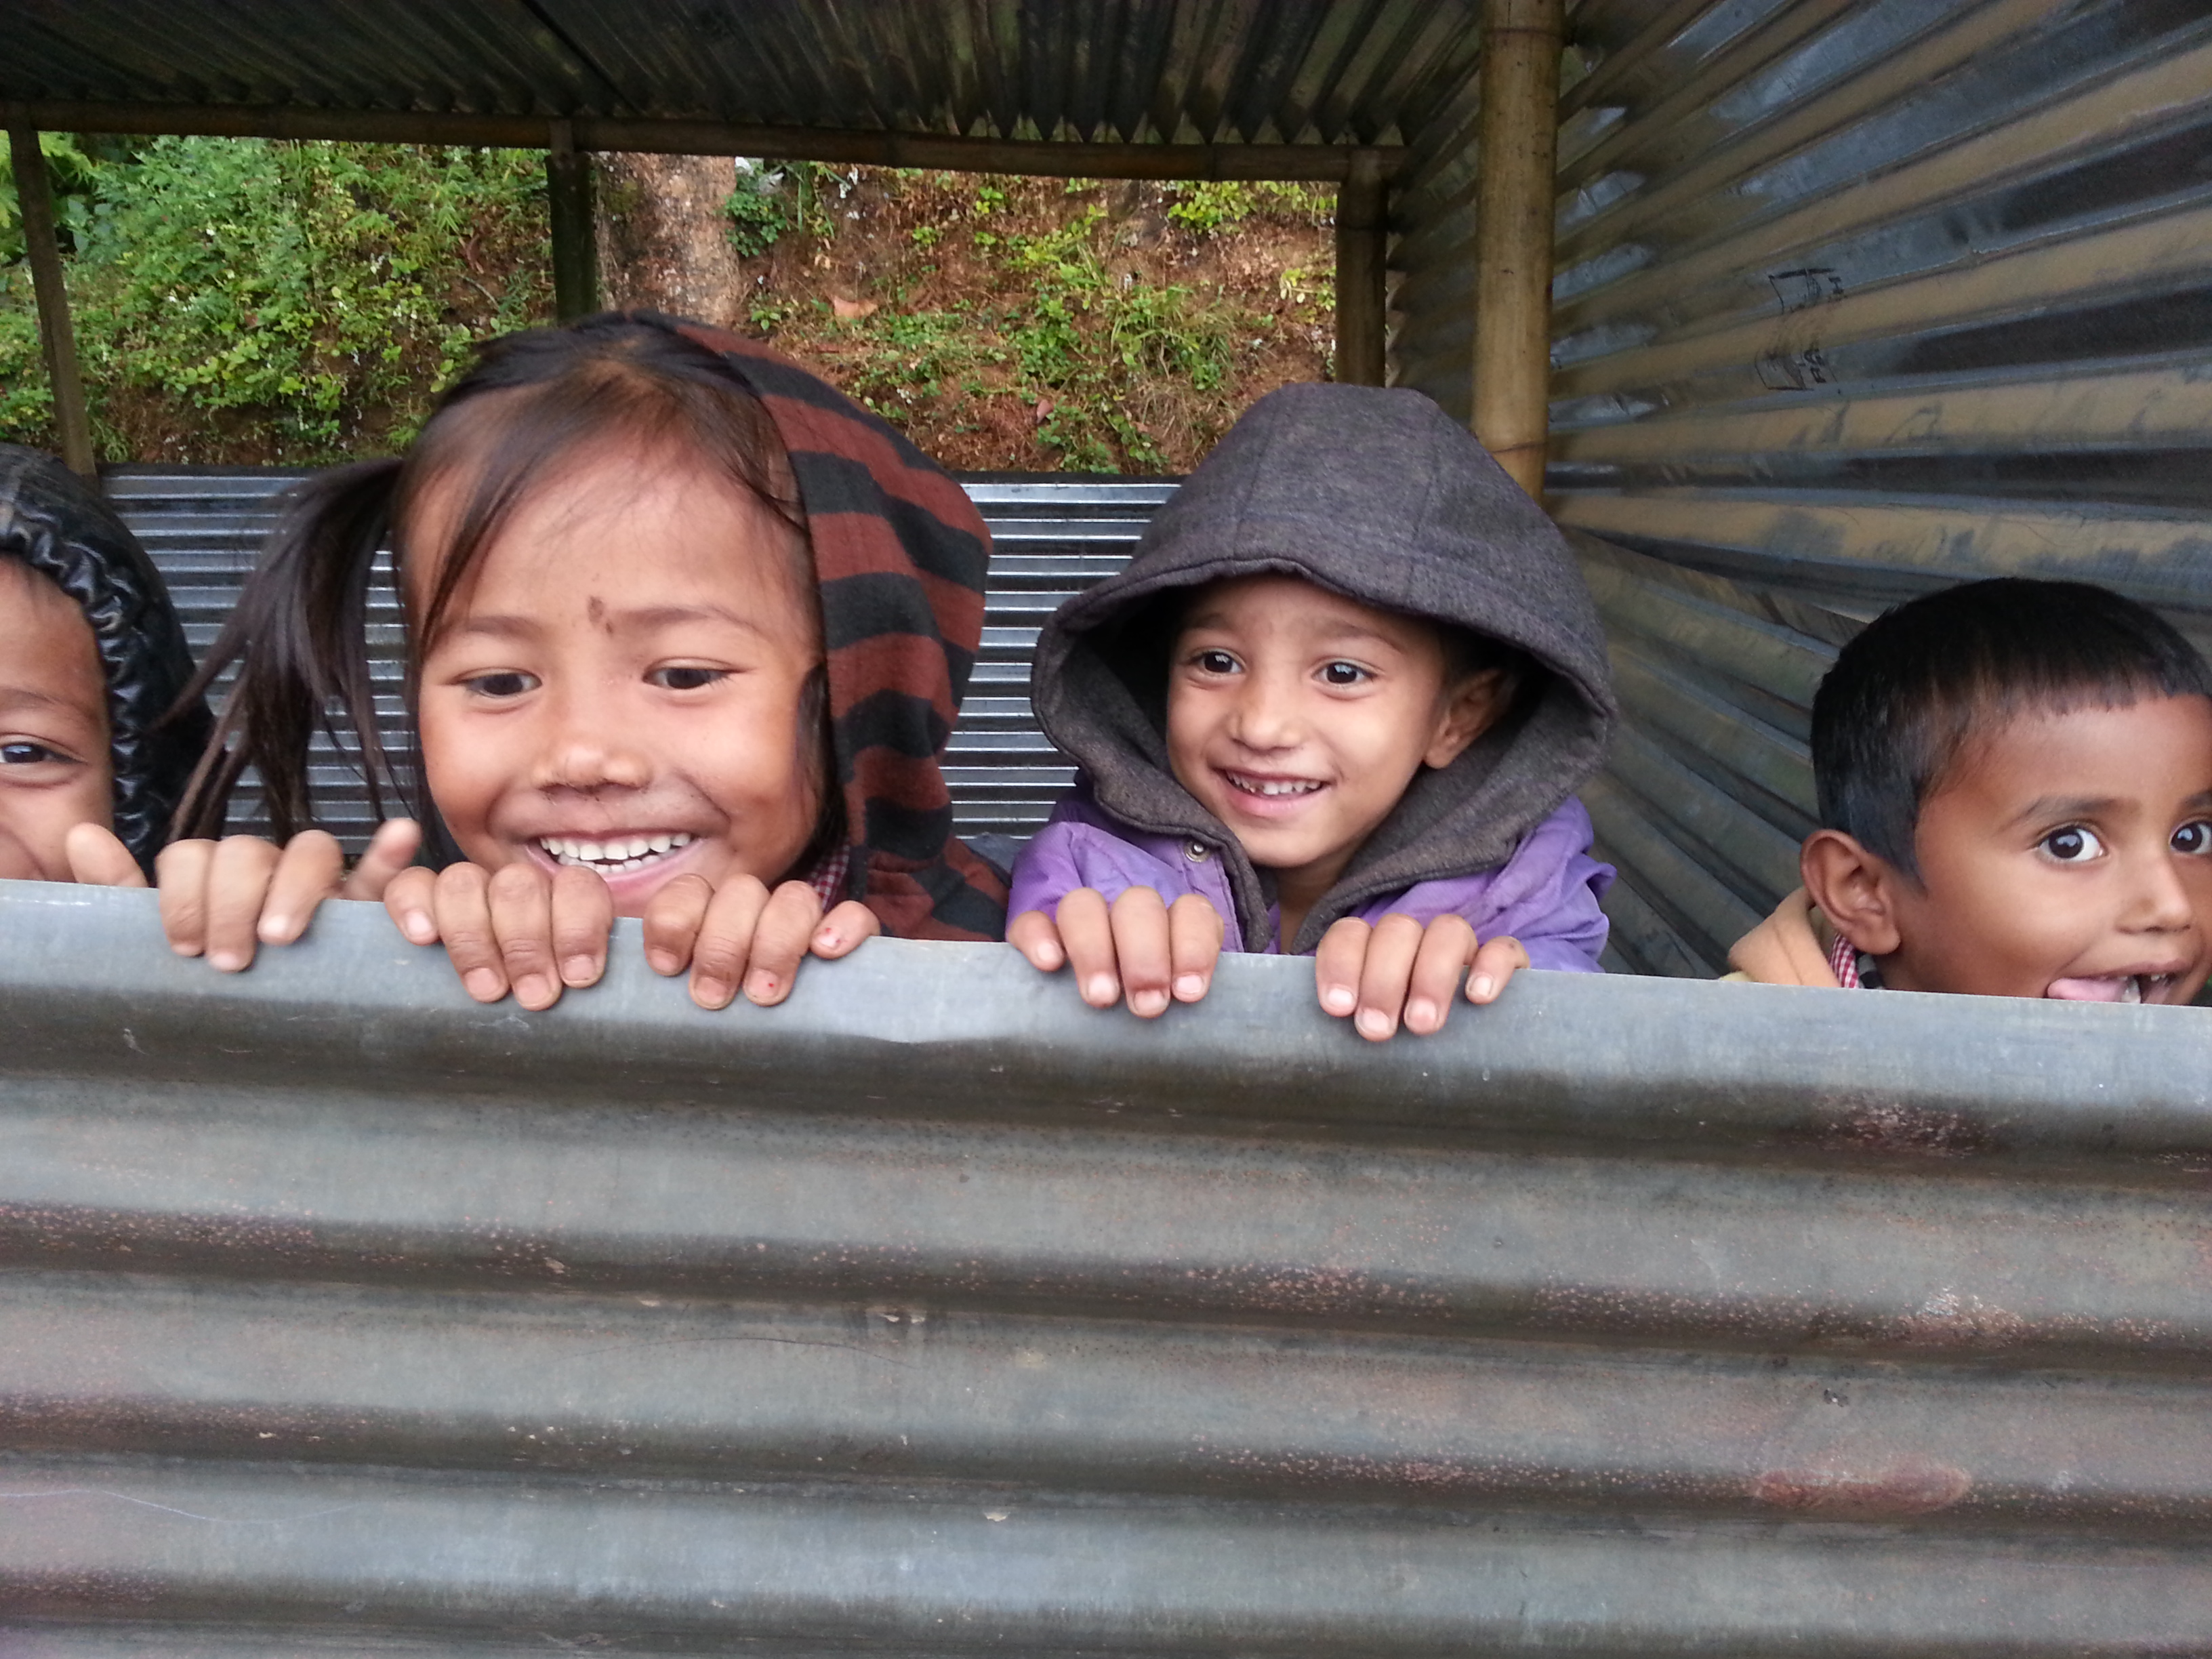 Children of the village in their tin hut classrooms, waiting for the school to reopen